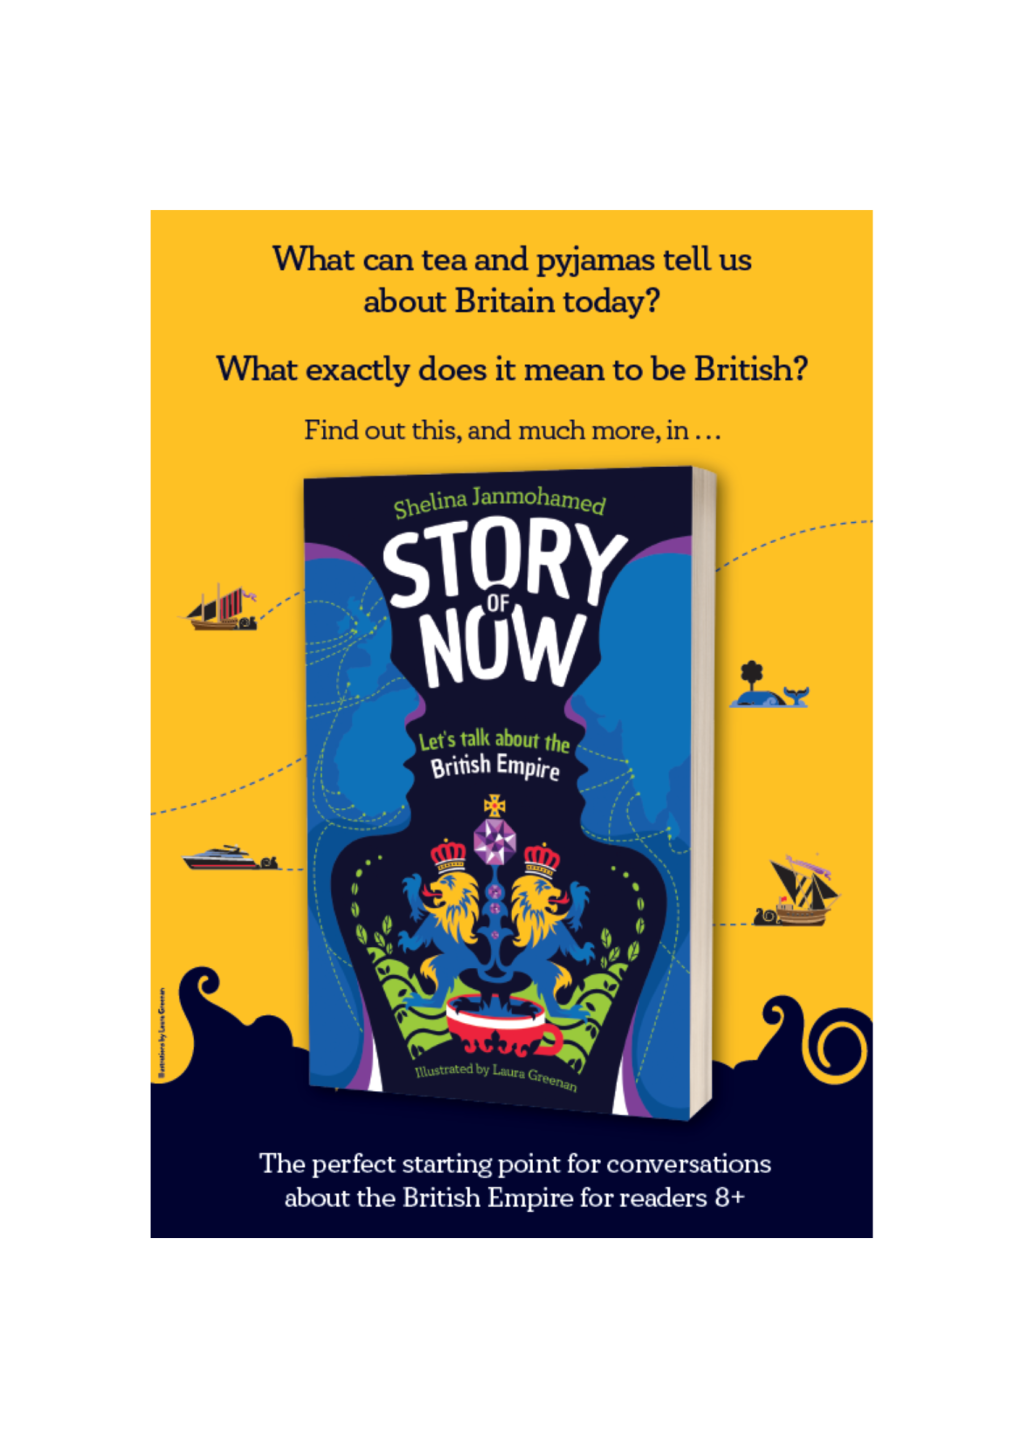 Story of Now standee on a white bacground. The standee has a bright yellow background with blue waves at the bottom. A blue book is coming out of the waves.